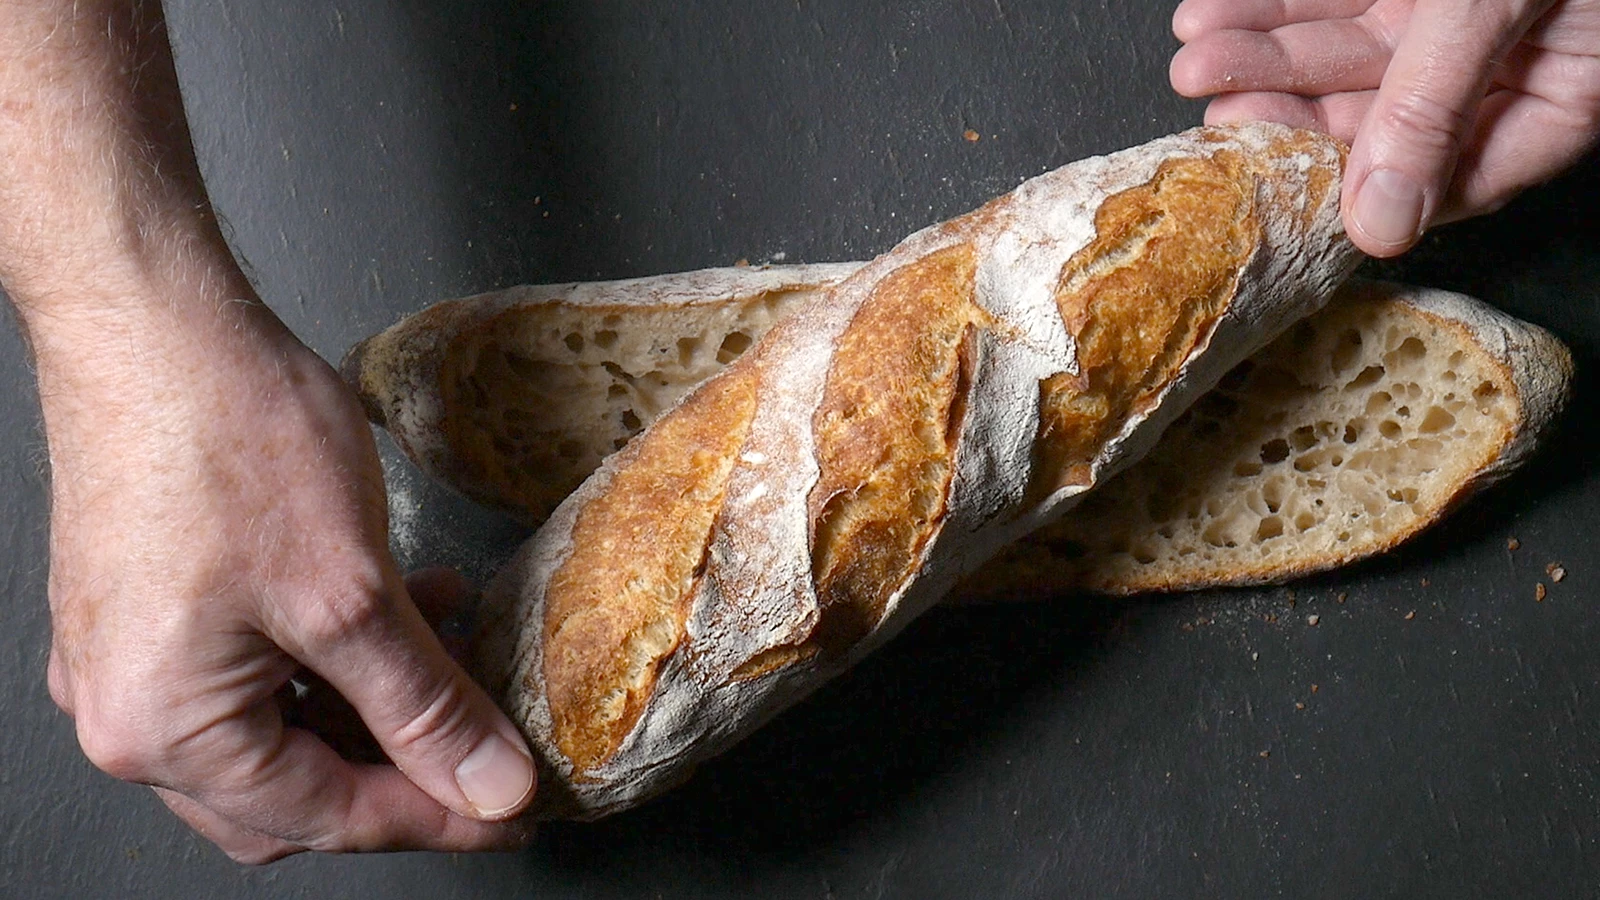 Classic French baguette recipe using a flipping board